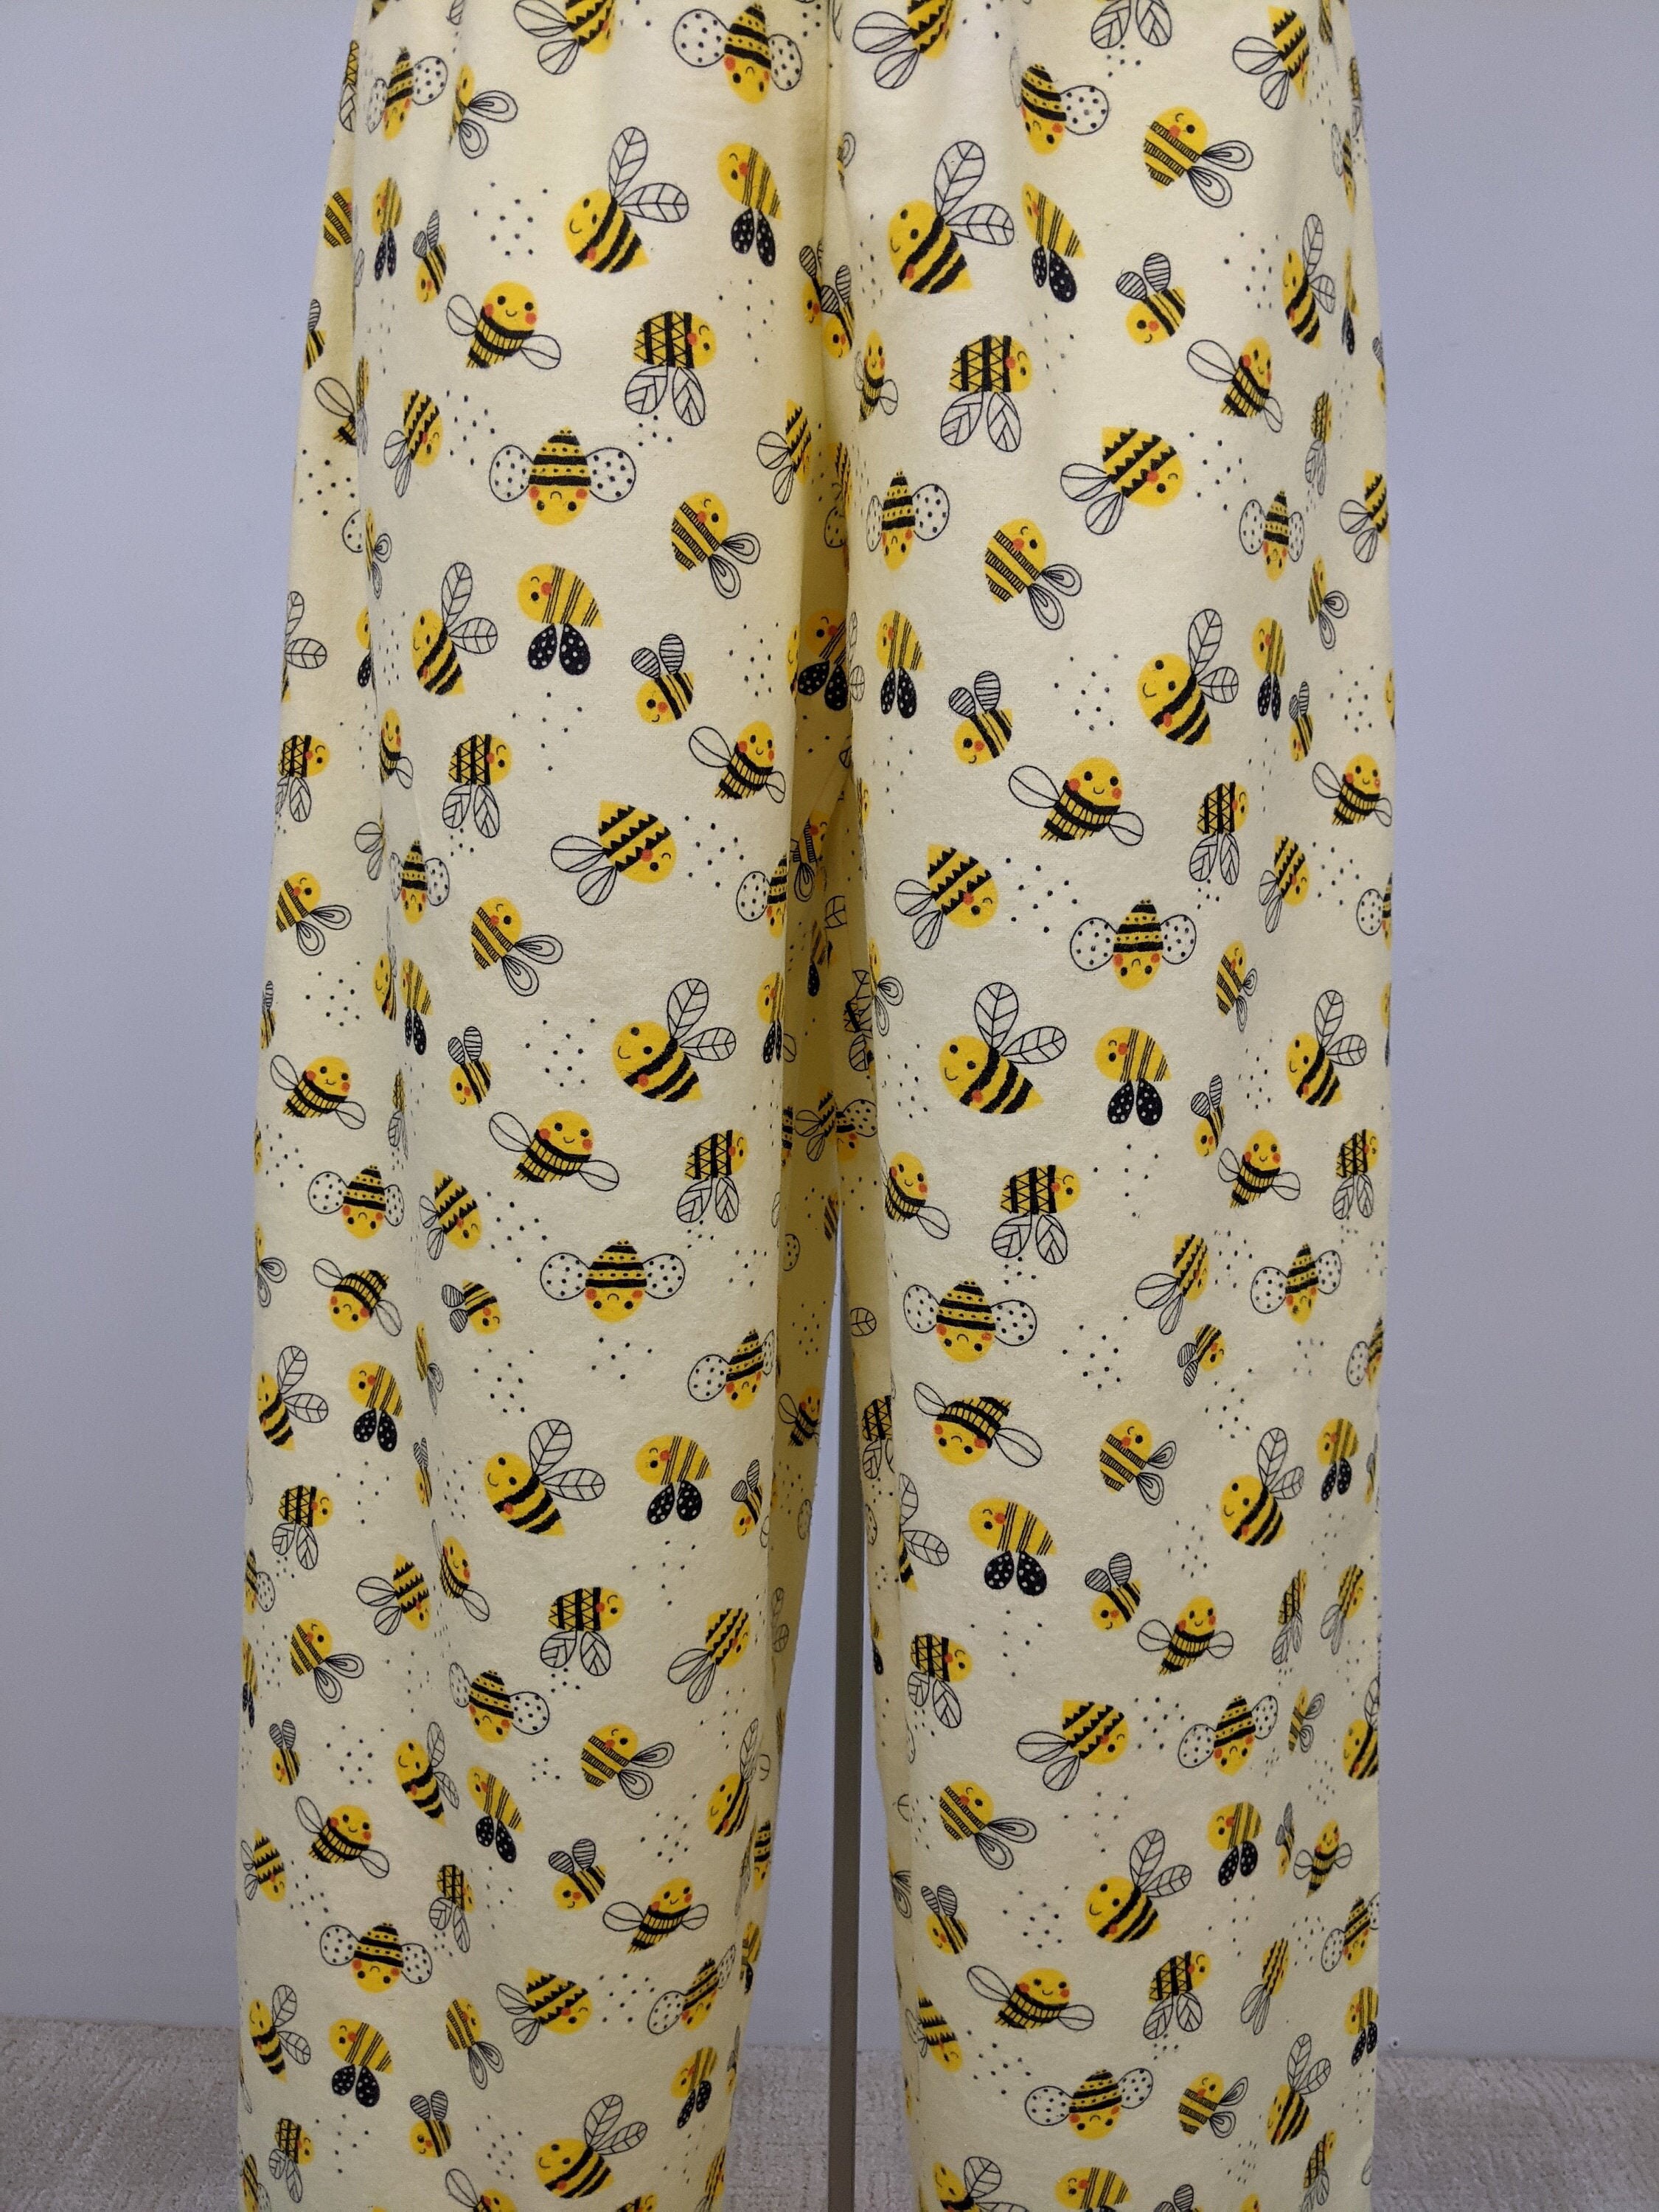 Share more than 85 bee trousers best